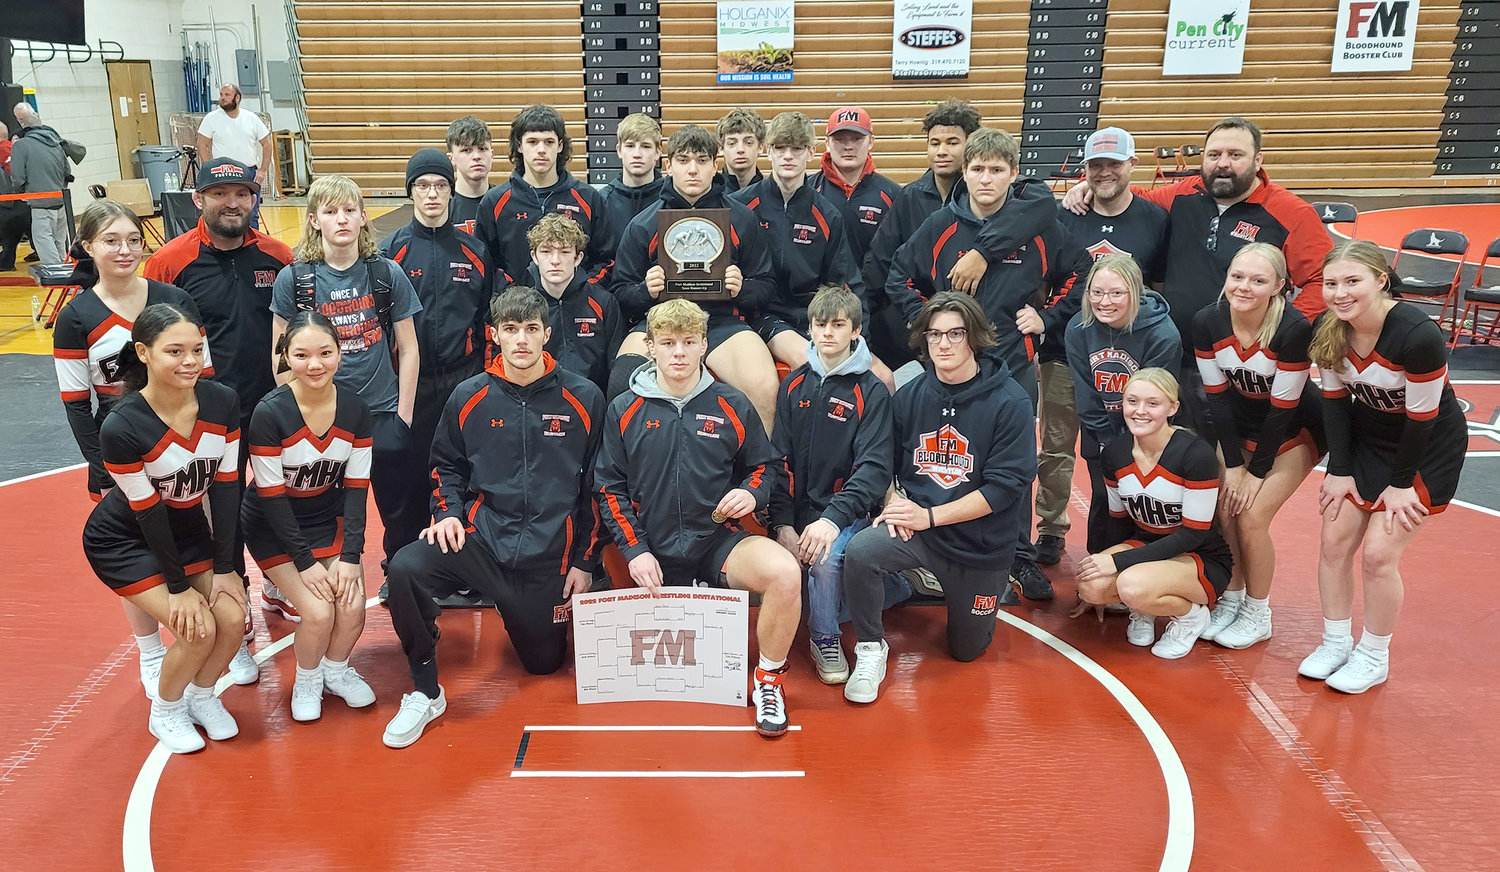 The Fort Madison Bloodhounds finished 2nd at Saturday's Fort Madison Invitational.